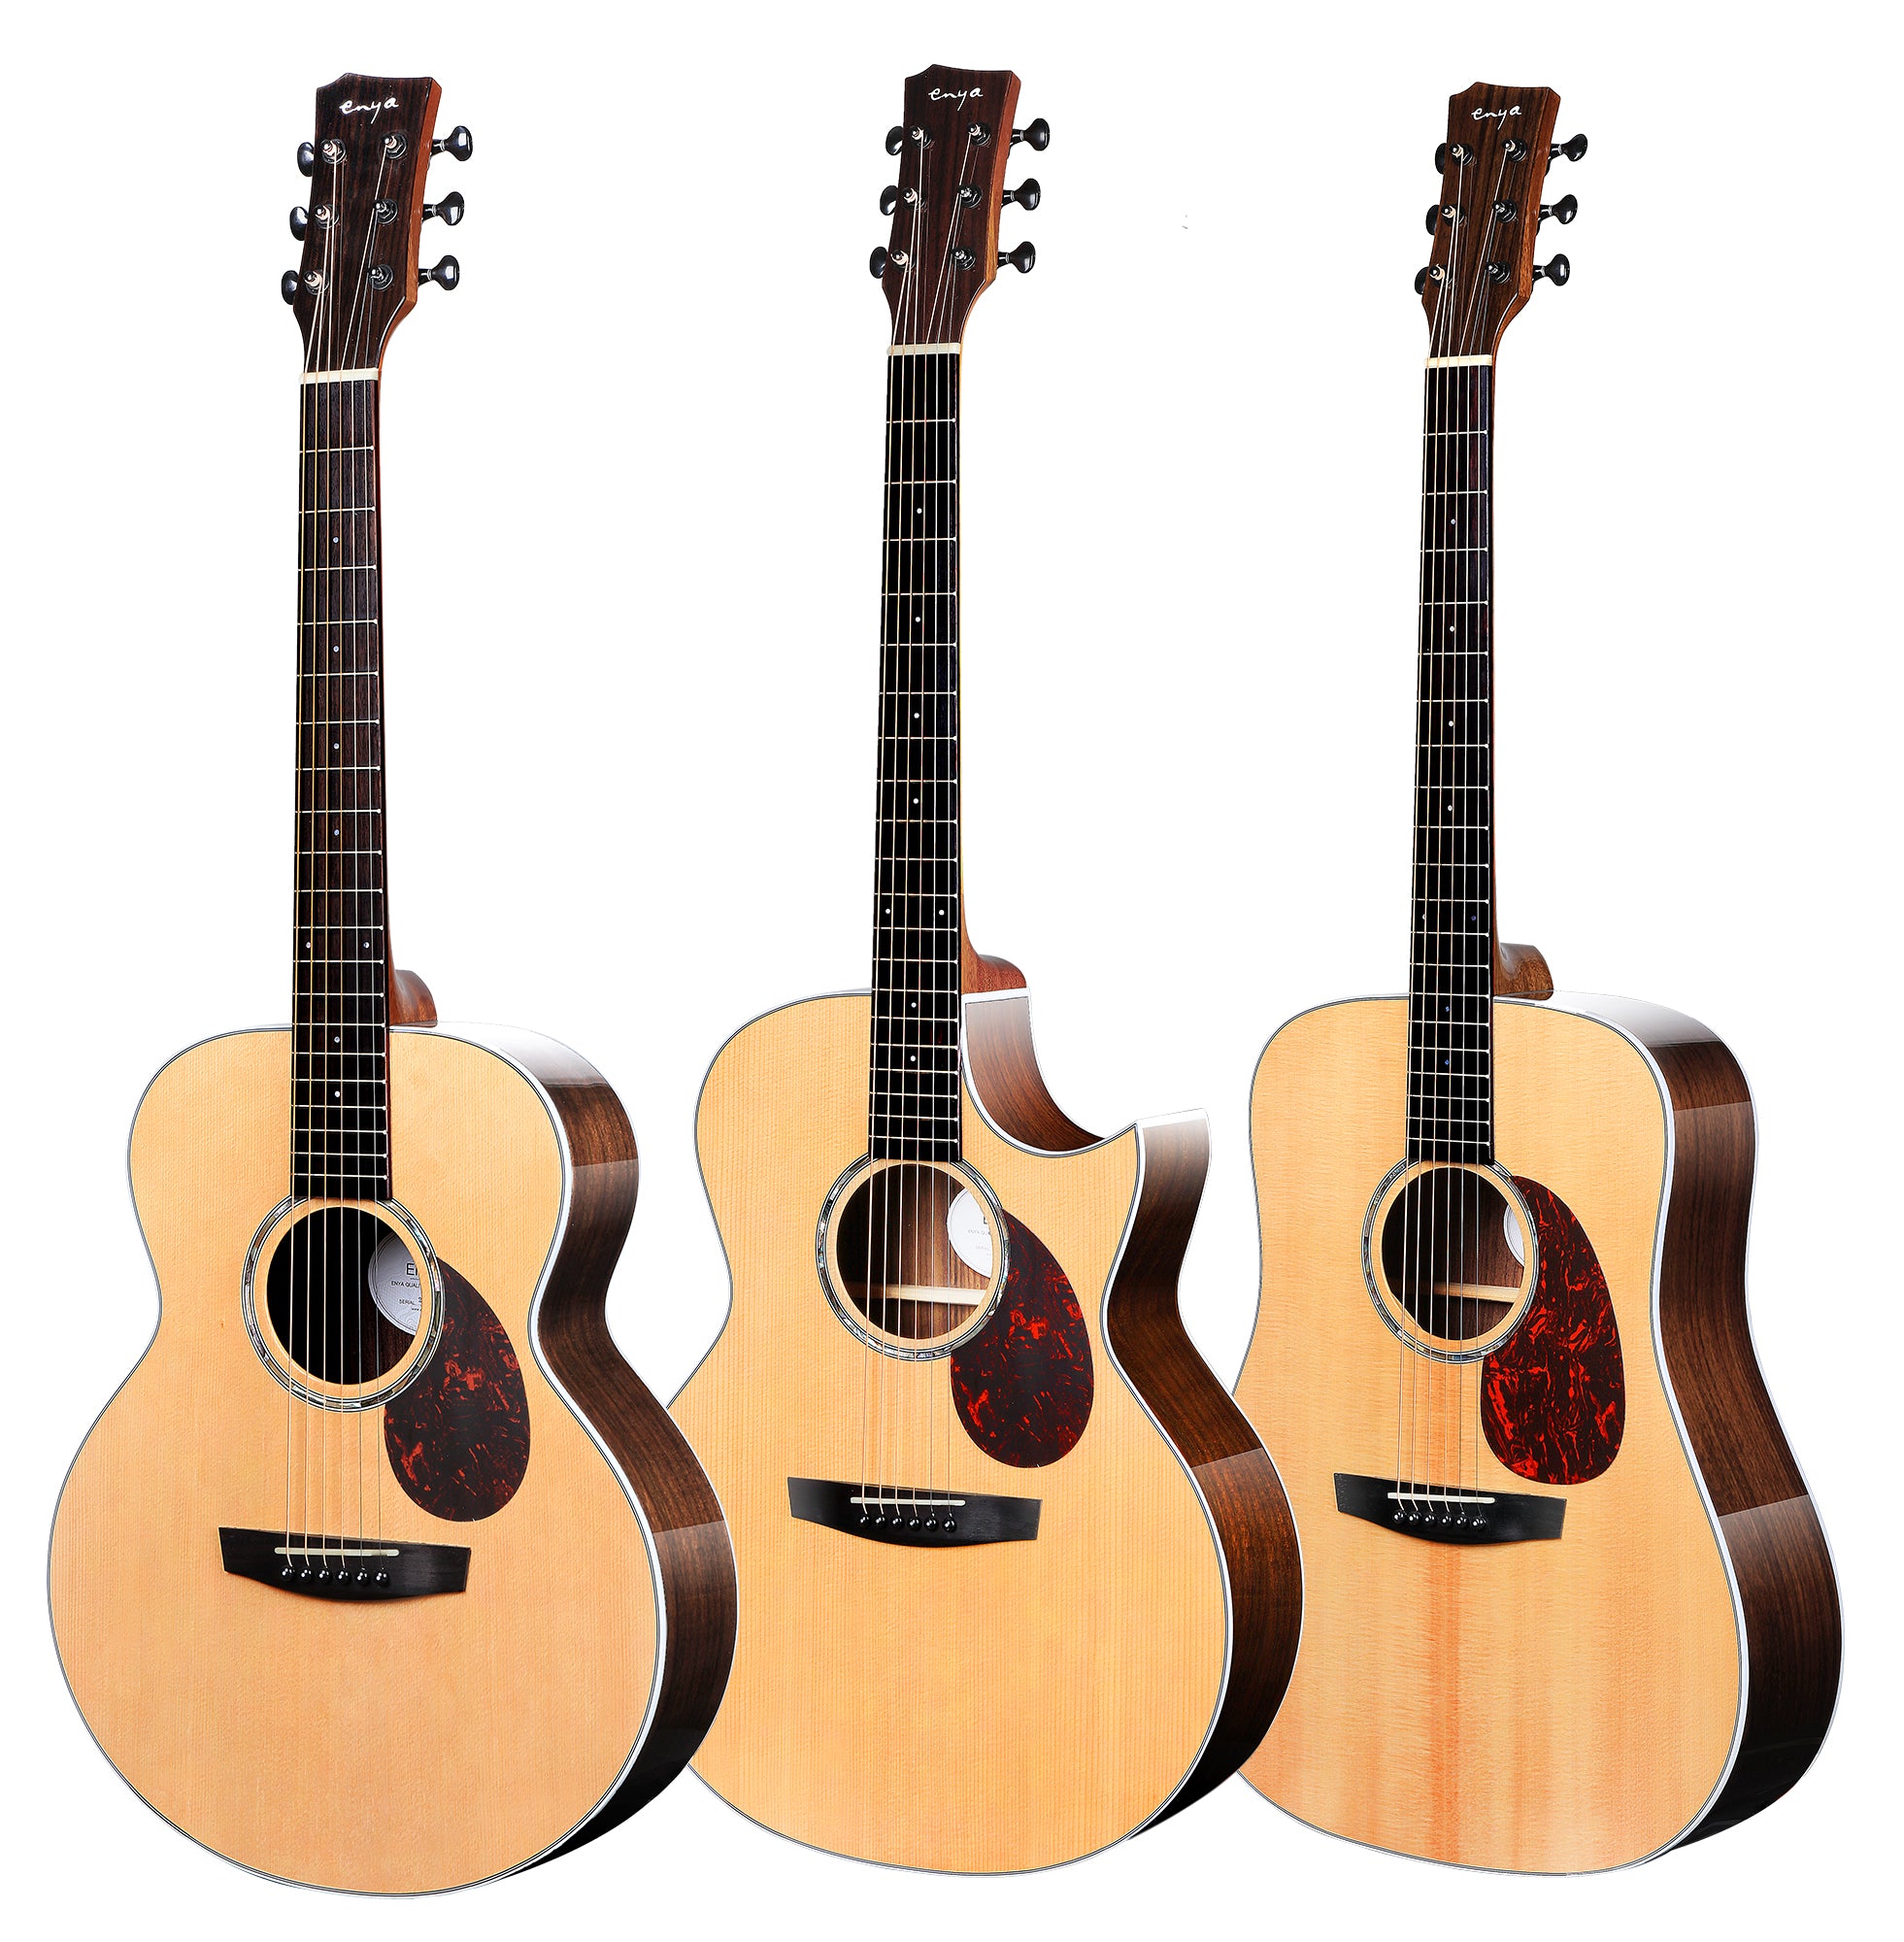 Enya ED-Q1 41" Acoustic Guitar Dreadnought Body With Bag And Accessories | ENYA , Zoso Music